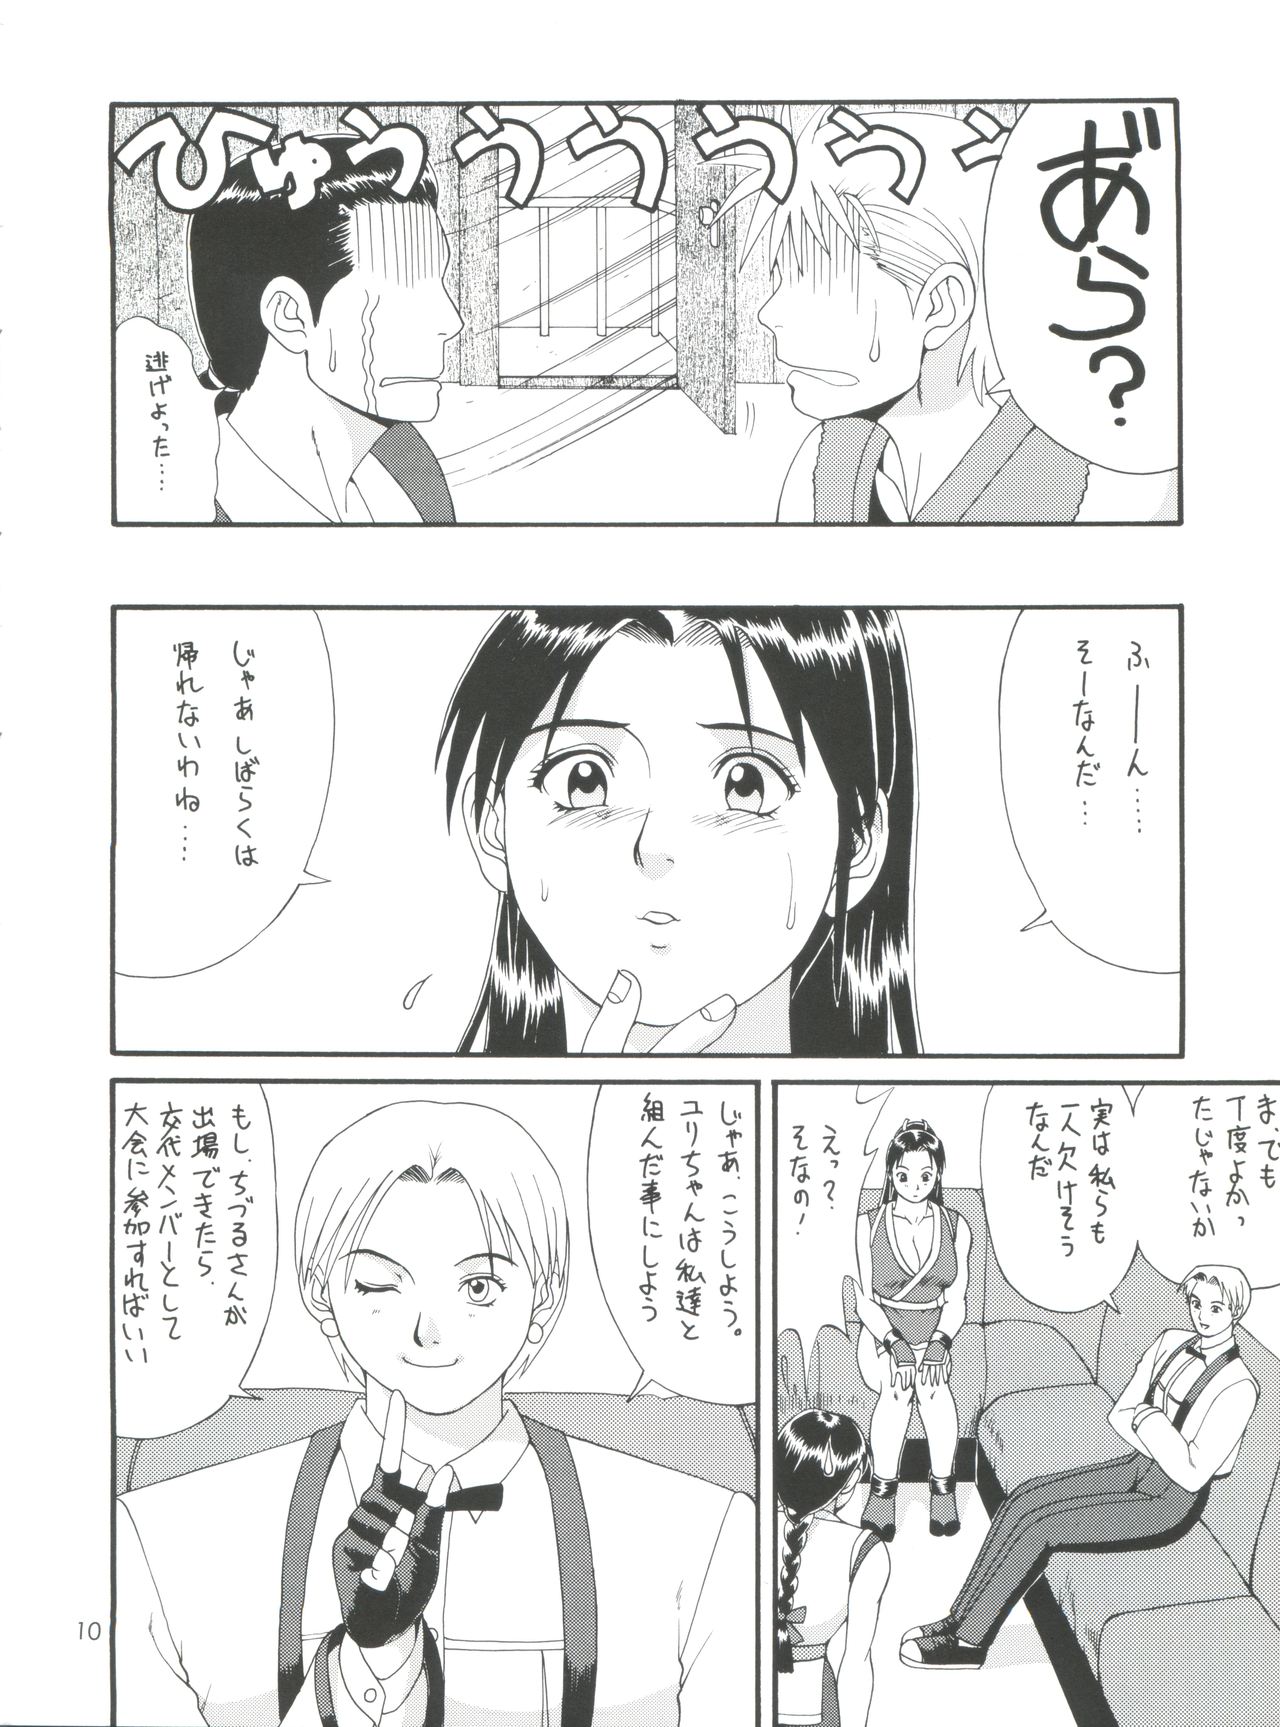 (CR24) [Saigado (Ishoku Dougen)] The Yuri & Friends '98 (King of Fighters) page 9 full